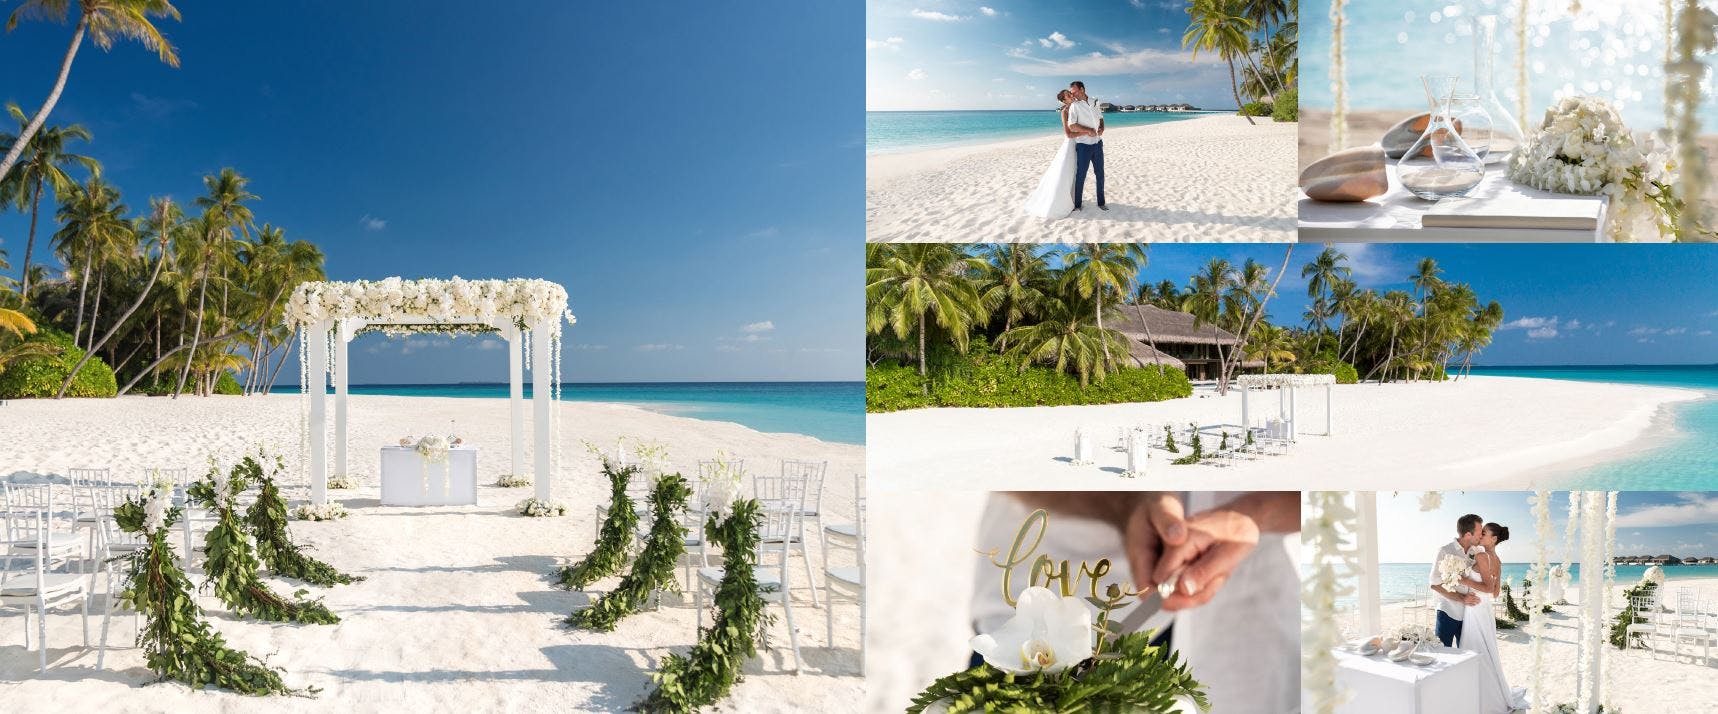 Crafting Unforgettable Moments - Your Path to the Perfect Wedding, Honeymoon, or Vow Renewal